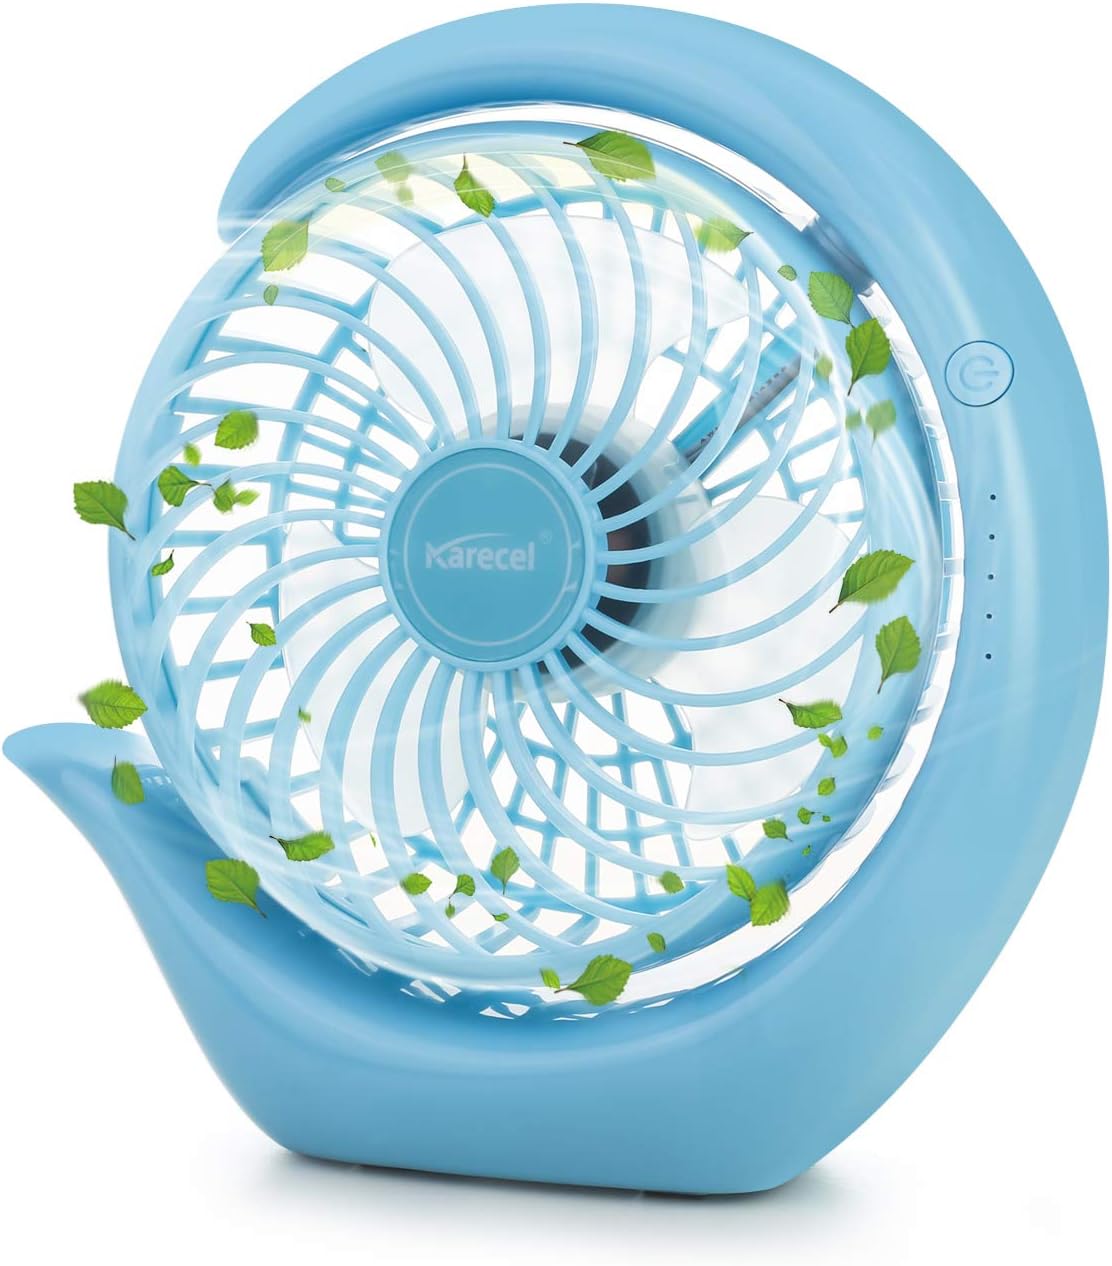 Stay cool and comfortable at your desk with a desk fan. Desk fans are a great way to keep cool and productive while you work. They are also great for personal use, such as keeping cool at night or while reading